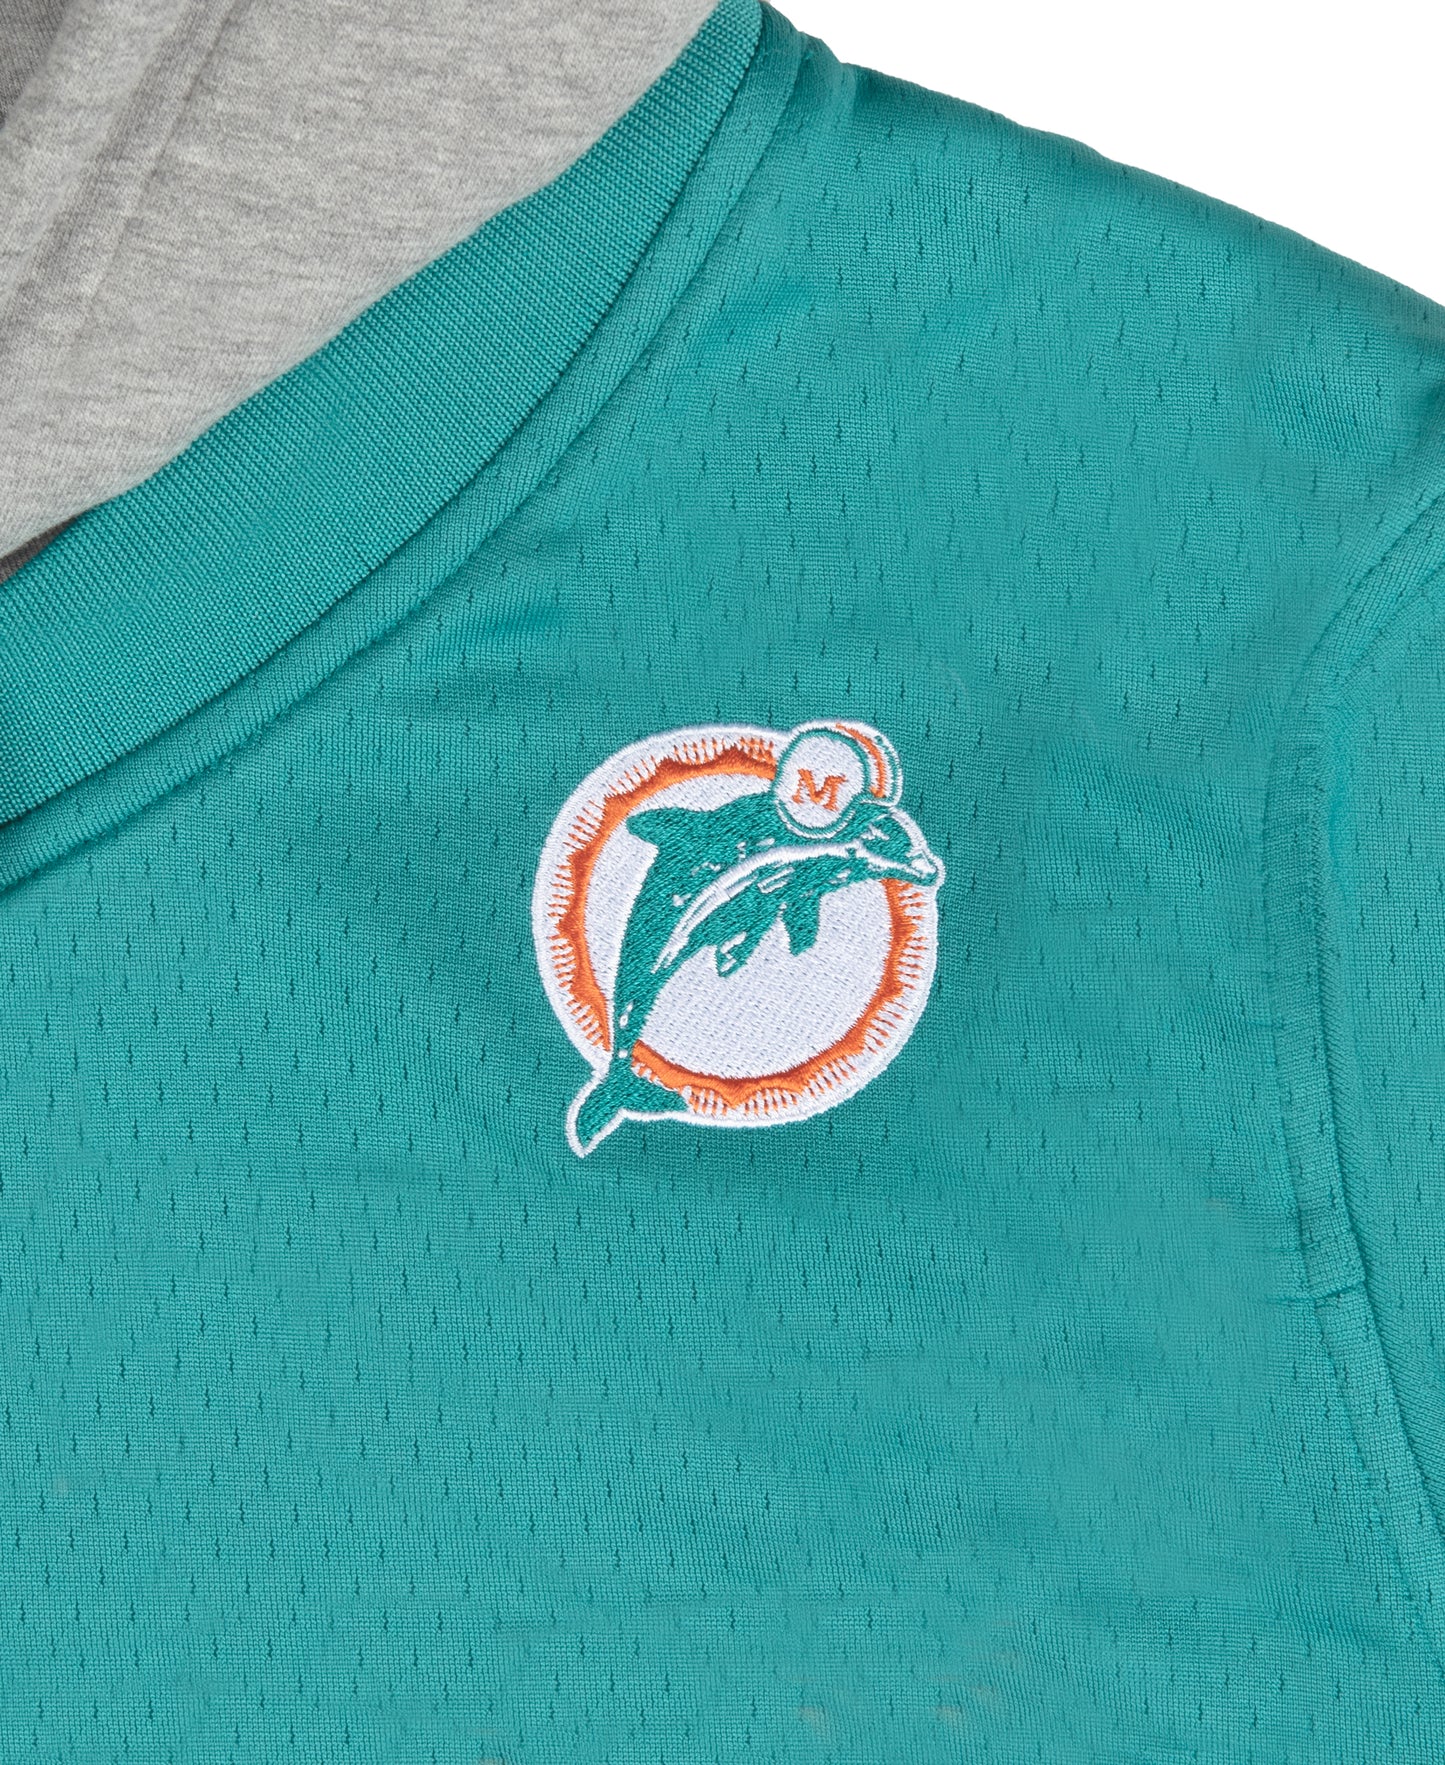 JUST DON MIAMI DOLPHINS